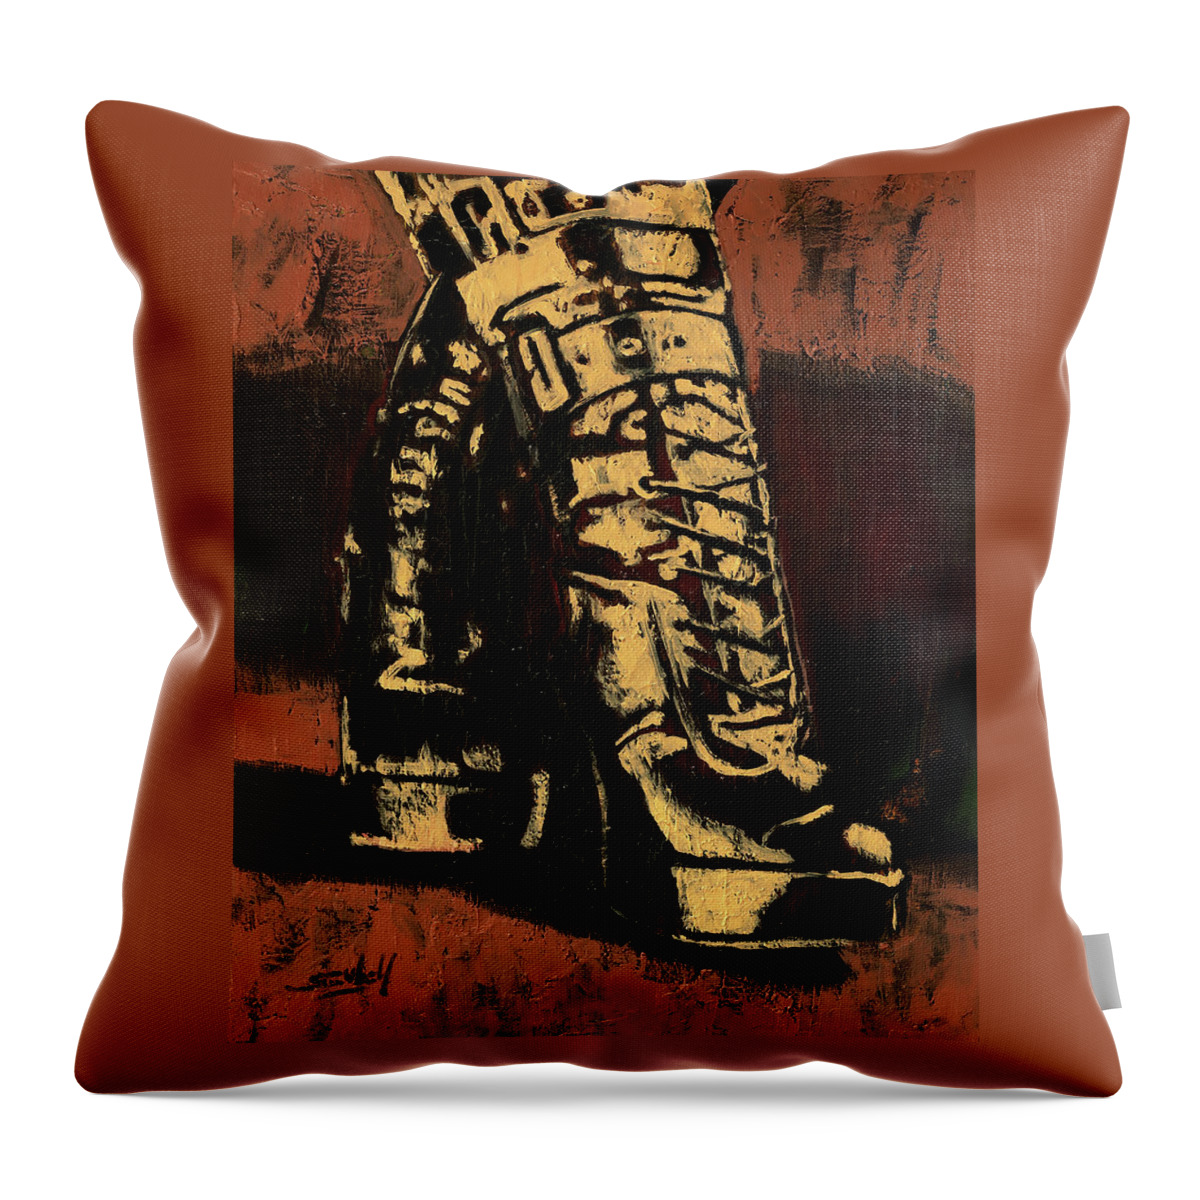 Boots Throw Pillow featuring the painting Tangence - La Croix by Sv Bell